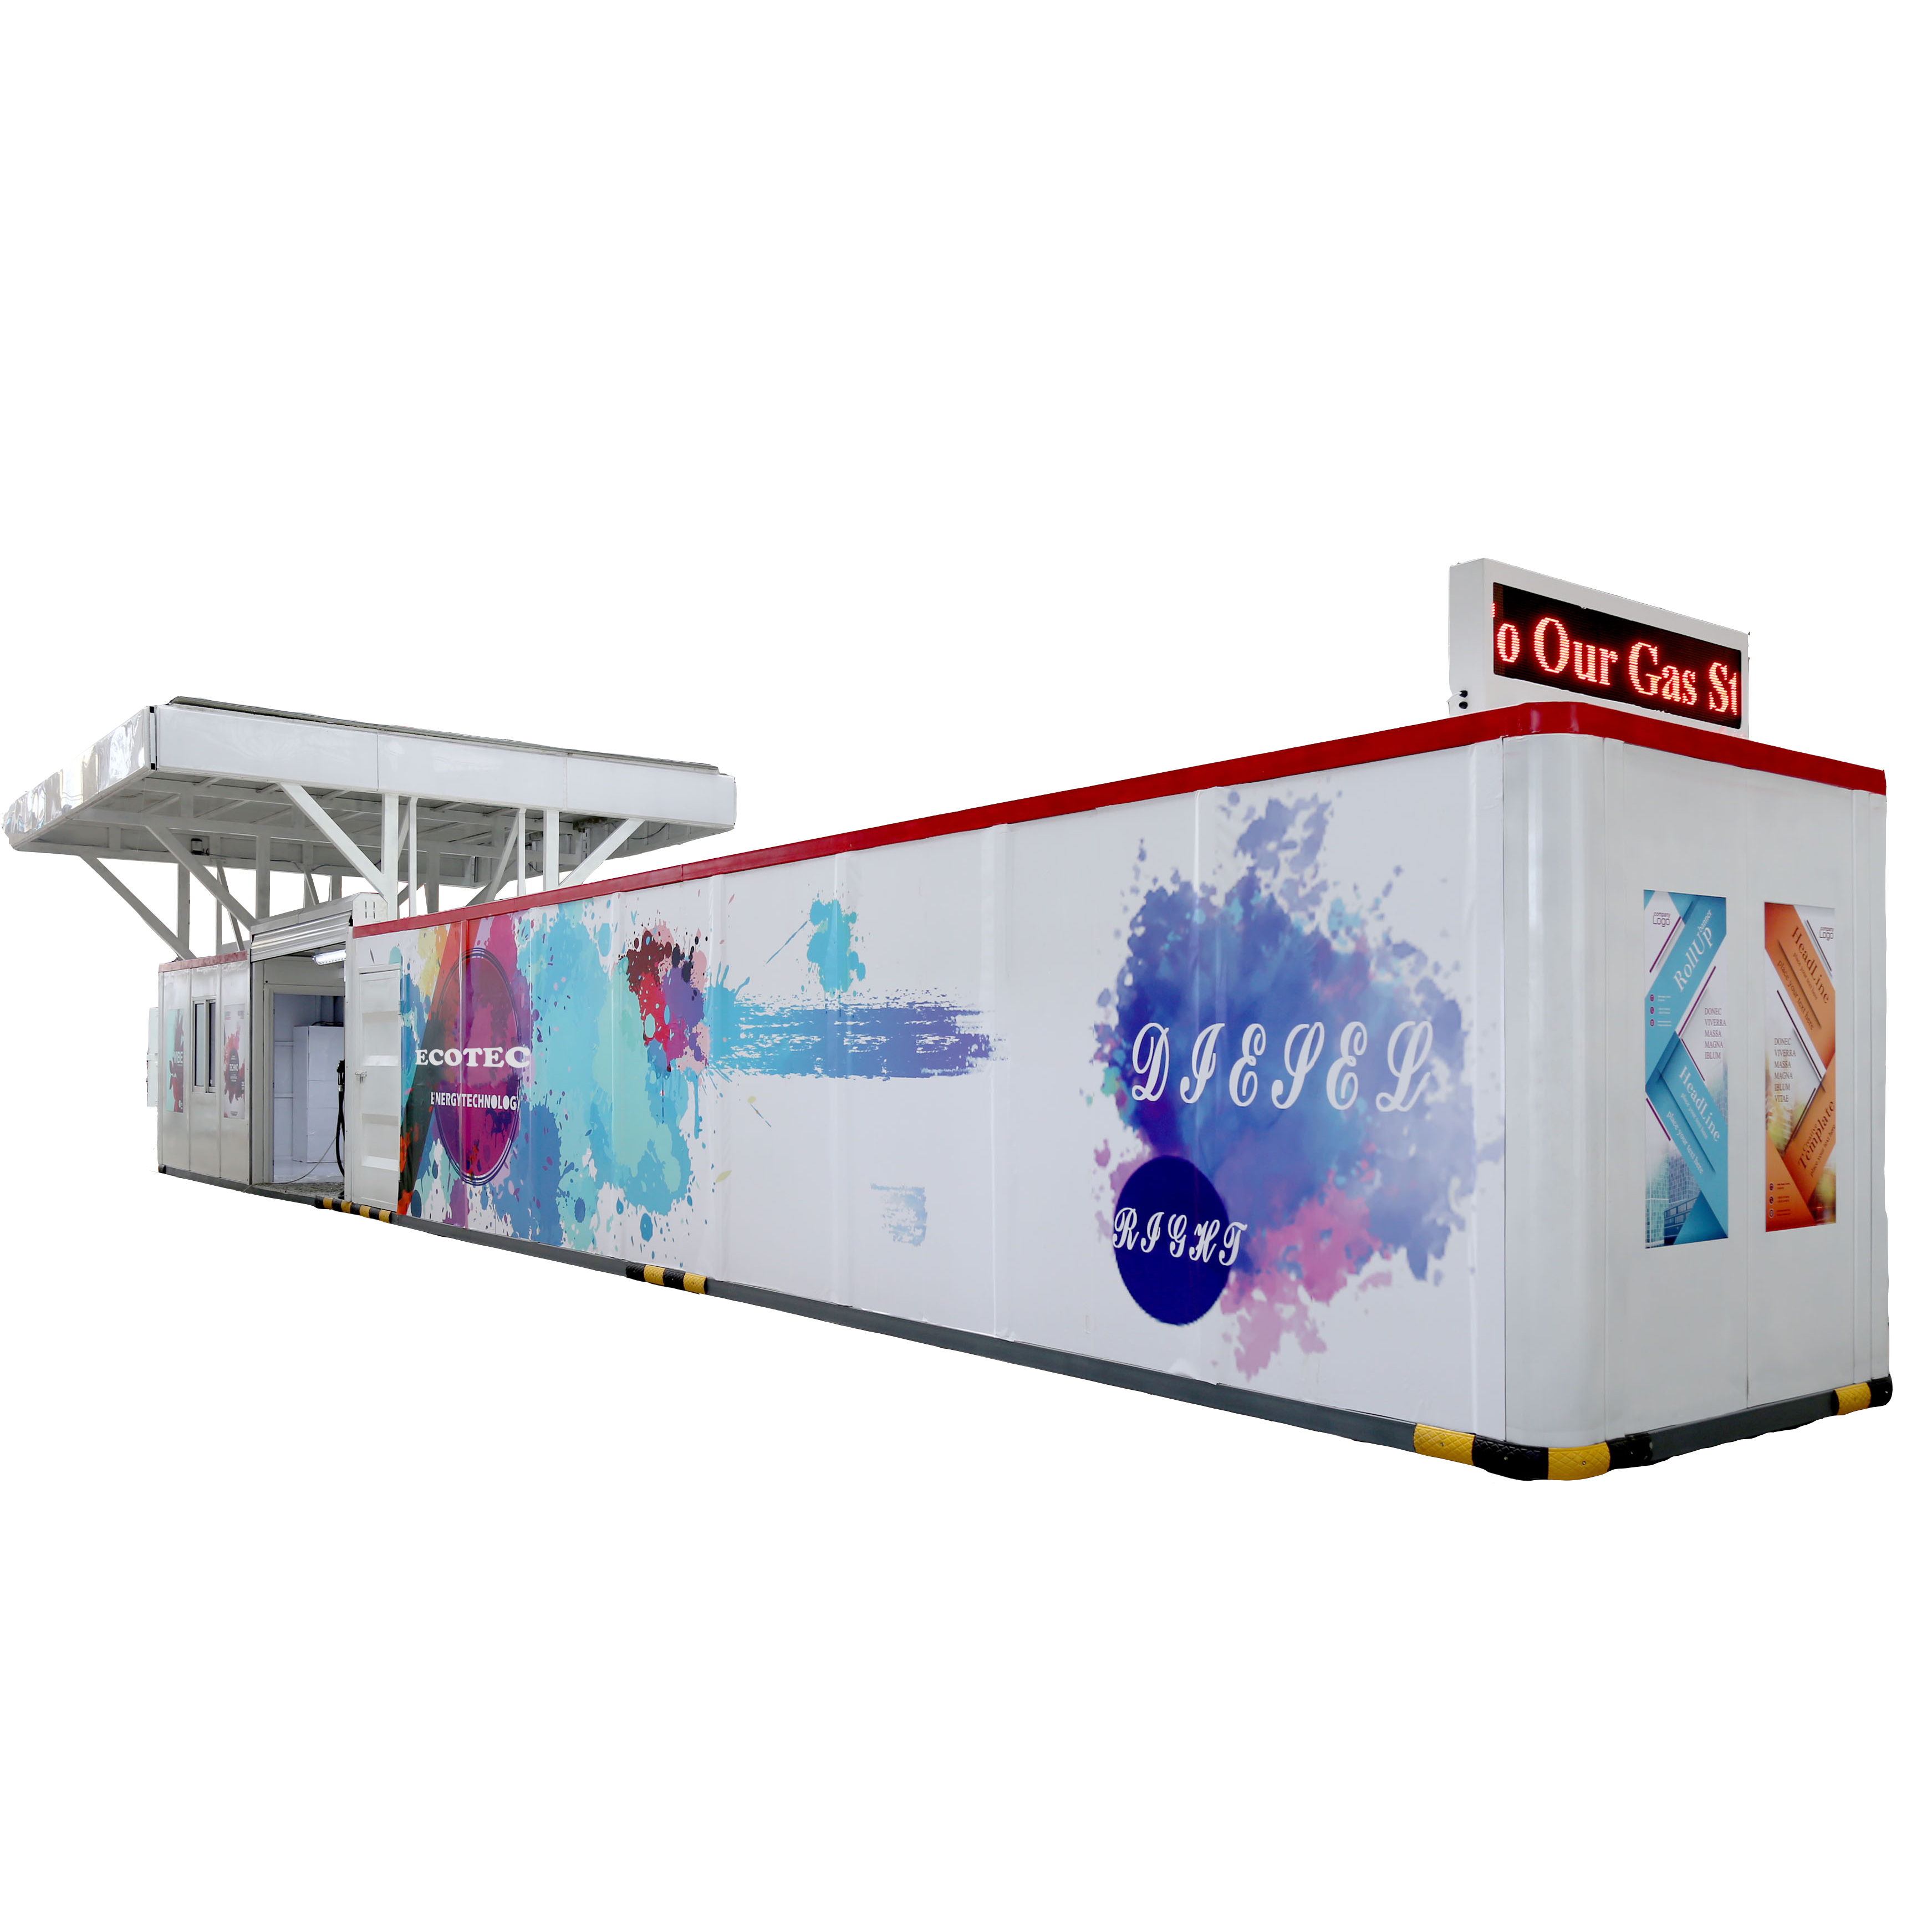 Container Fuel Stations Gas Container Filling Station Mobile Gas Station